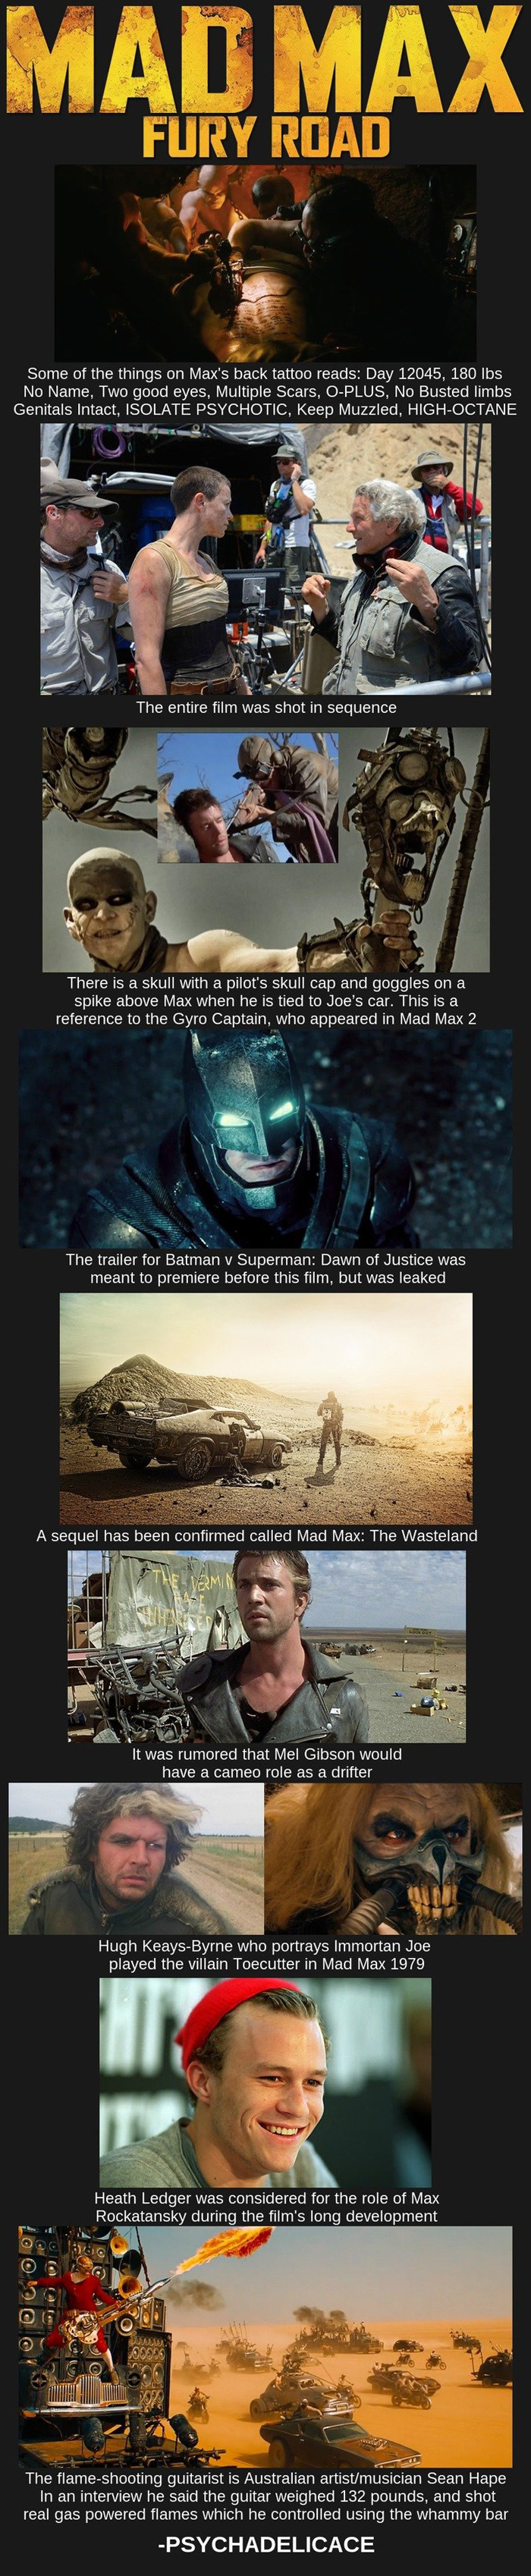 Mad Max: Fury Road Facts